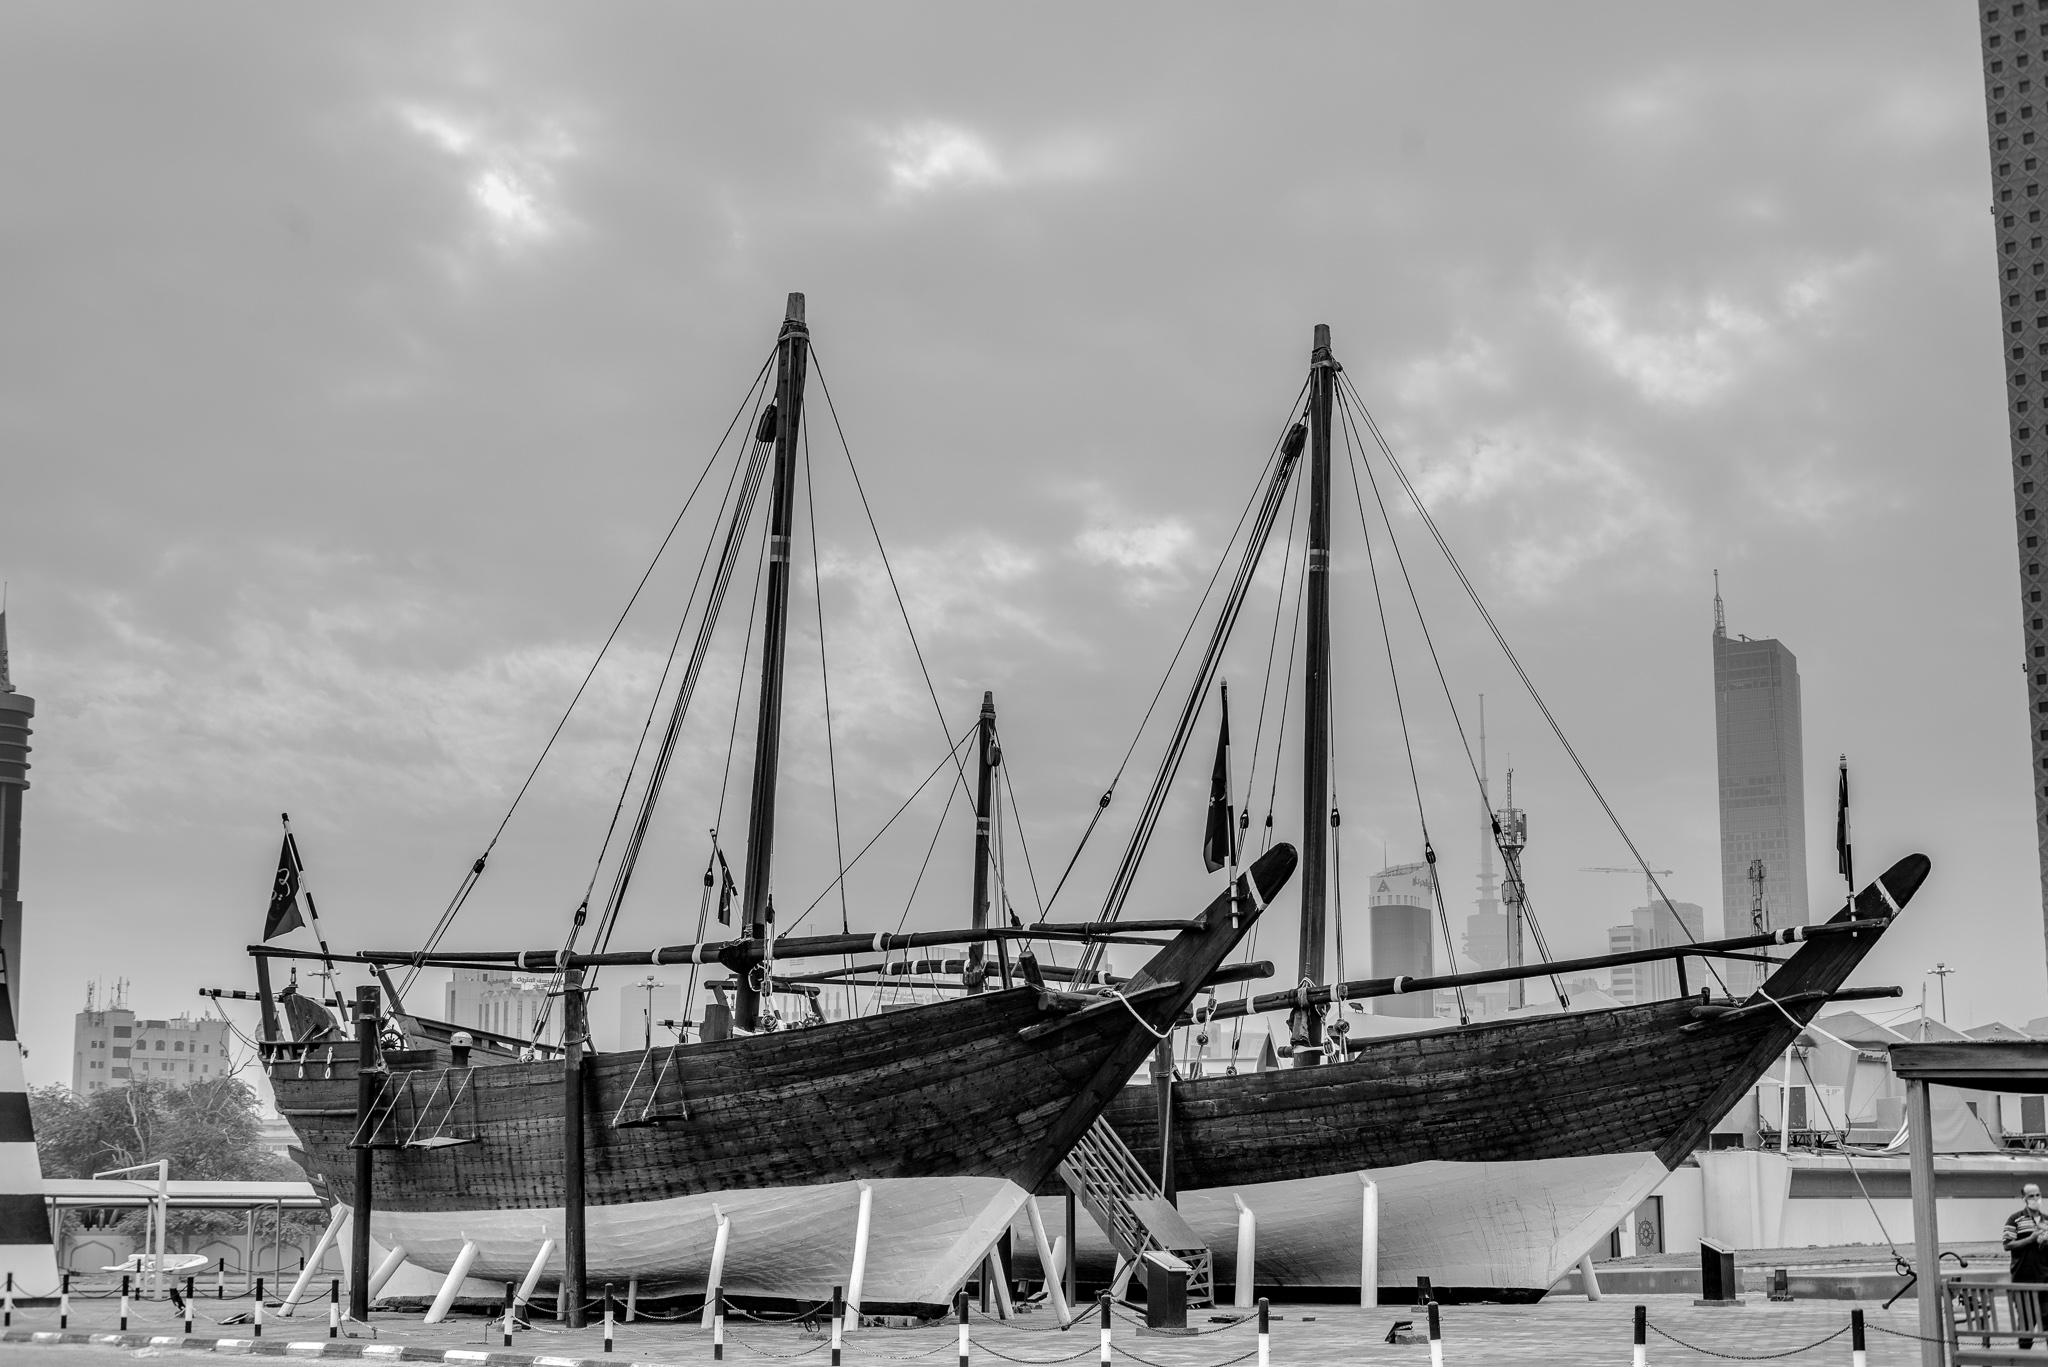 two old fishing boats in Kuwait